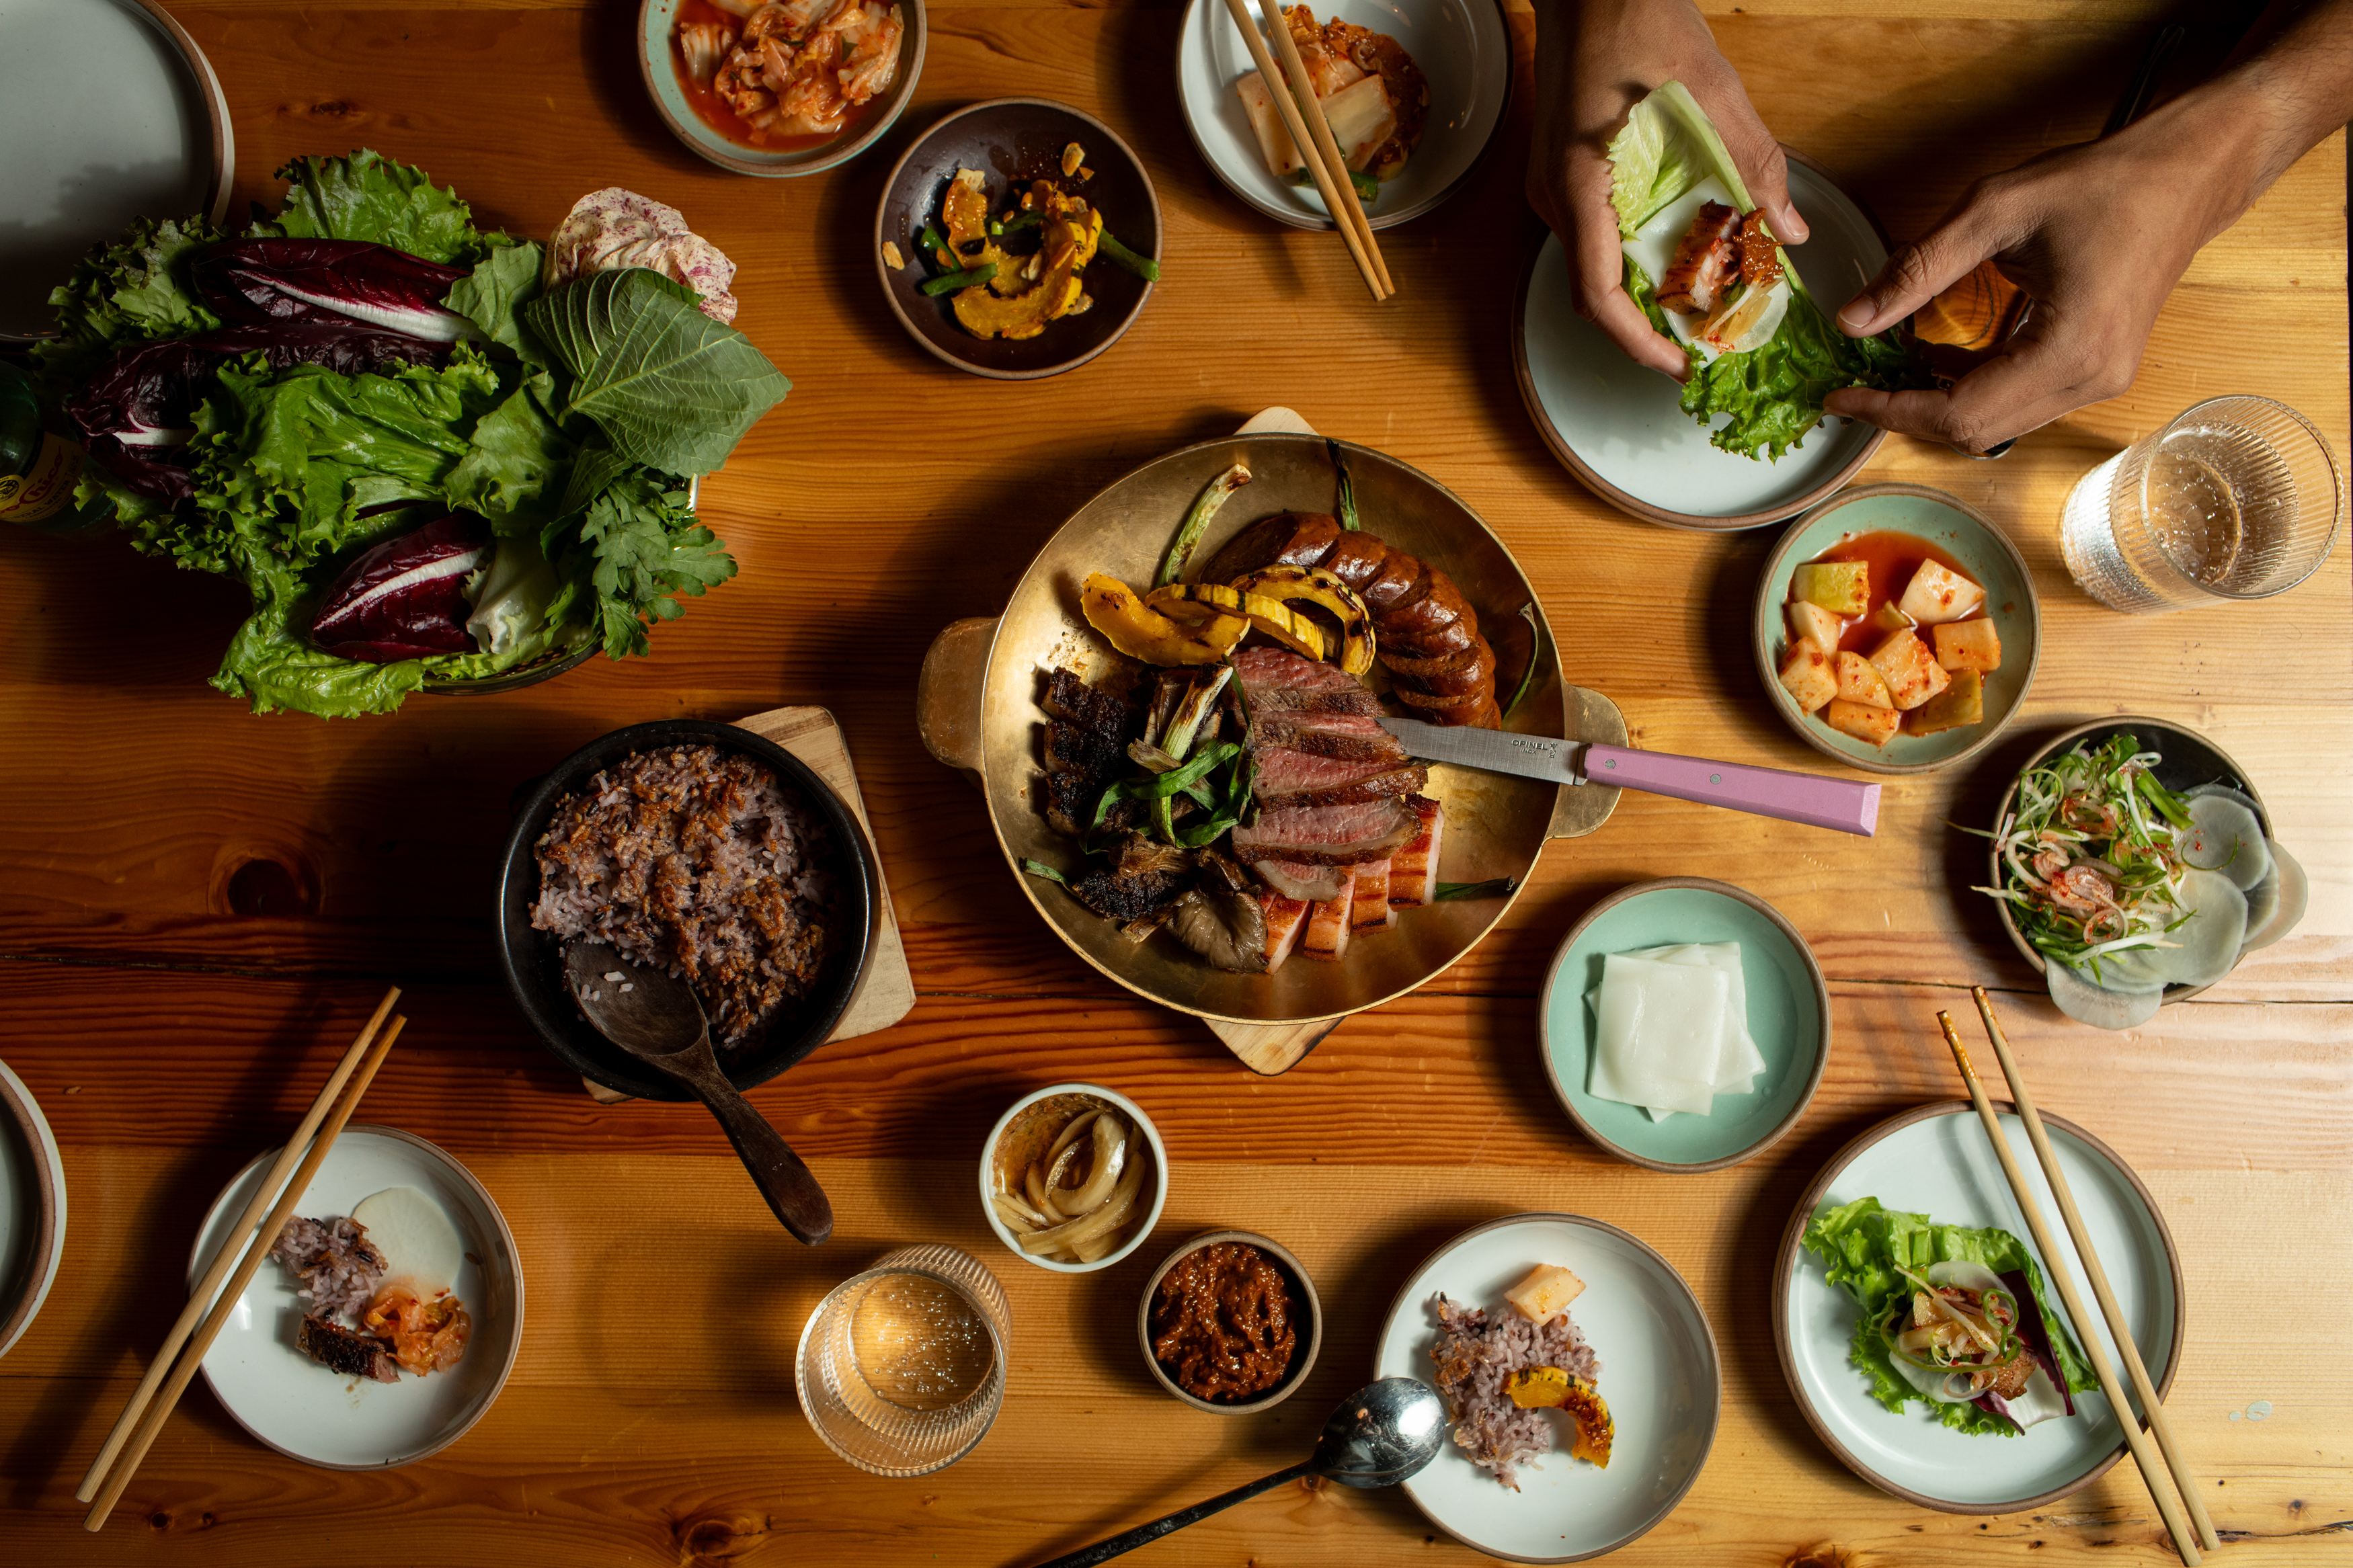 Overhead look at a table filled with cuts of meat, rice, and banchan. Two hands assemble a bite of meat and pickles on a lettuce wrap.